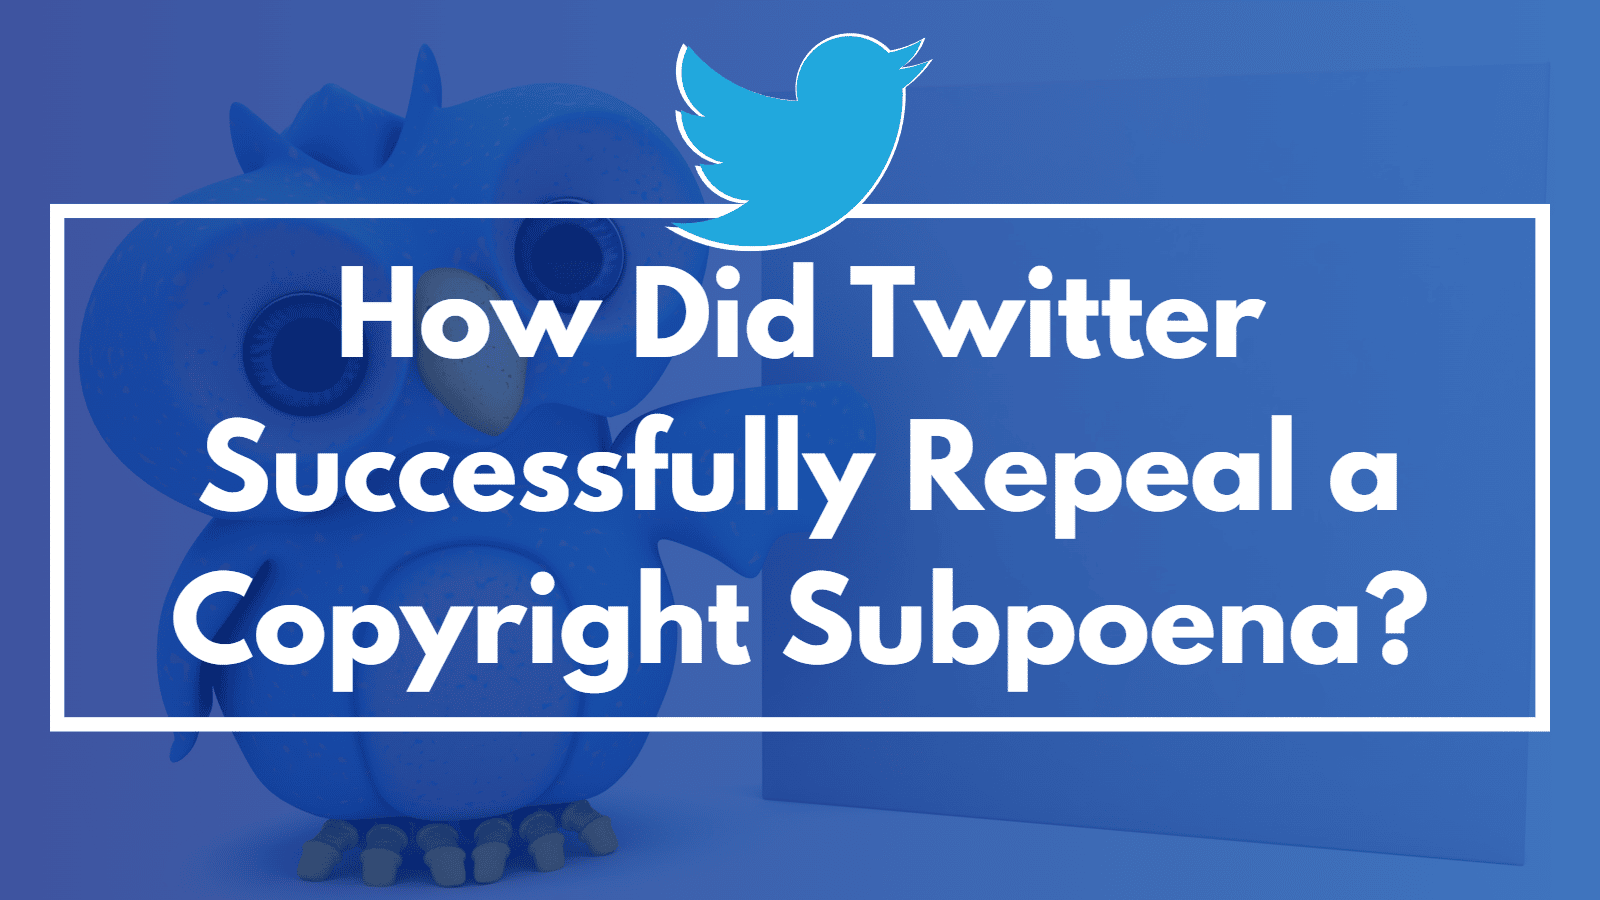 How Did Twitter Successfully Repeal a Copyright Subpoena?